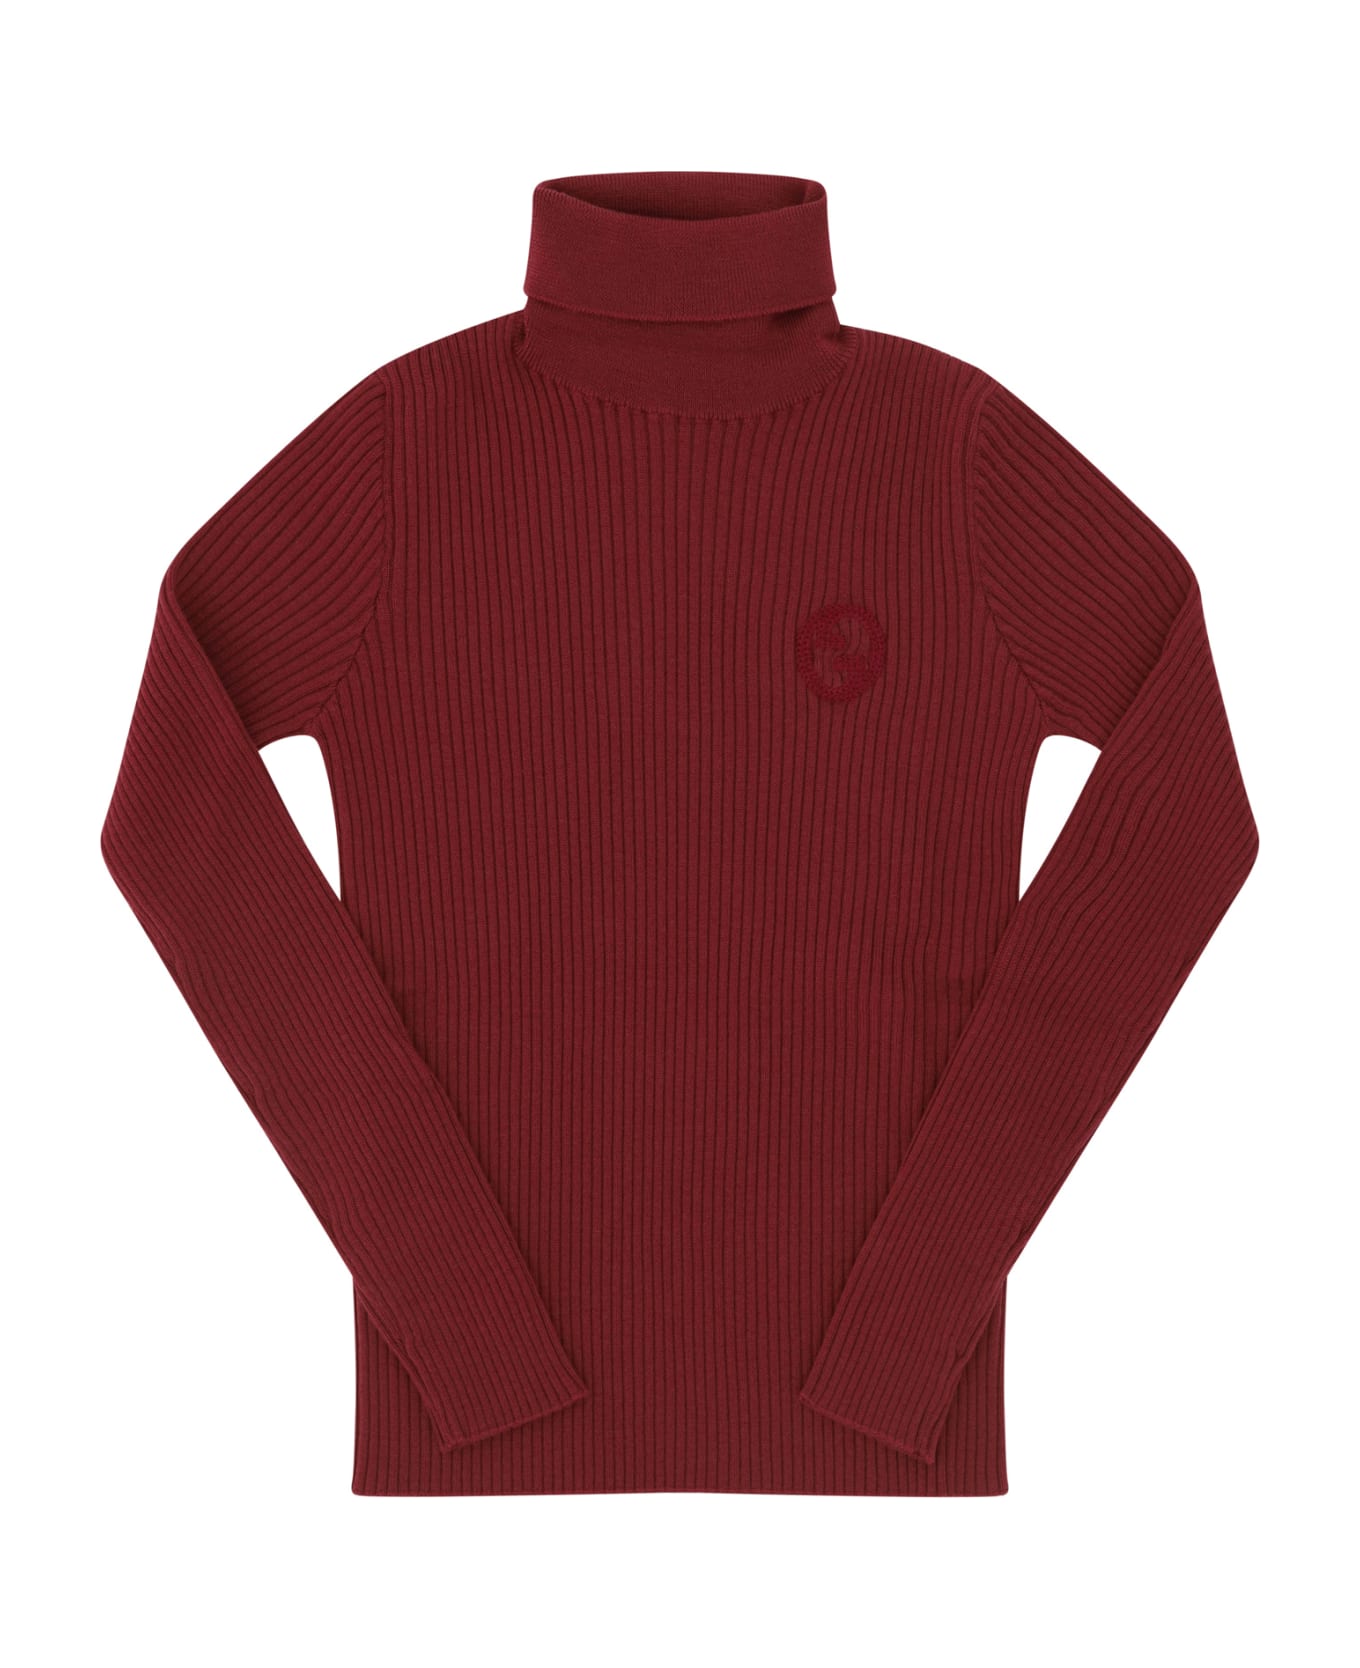 Gucci Sweater For Boy - Ruby/mix